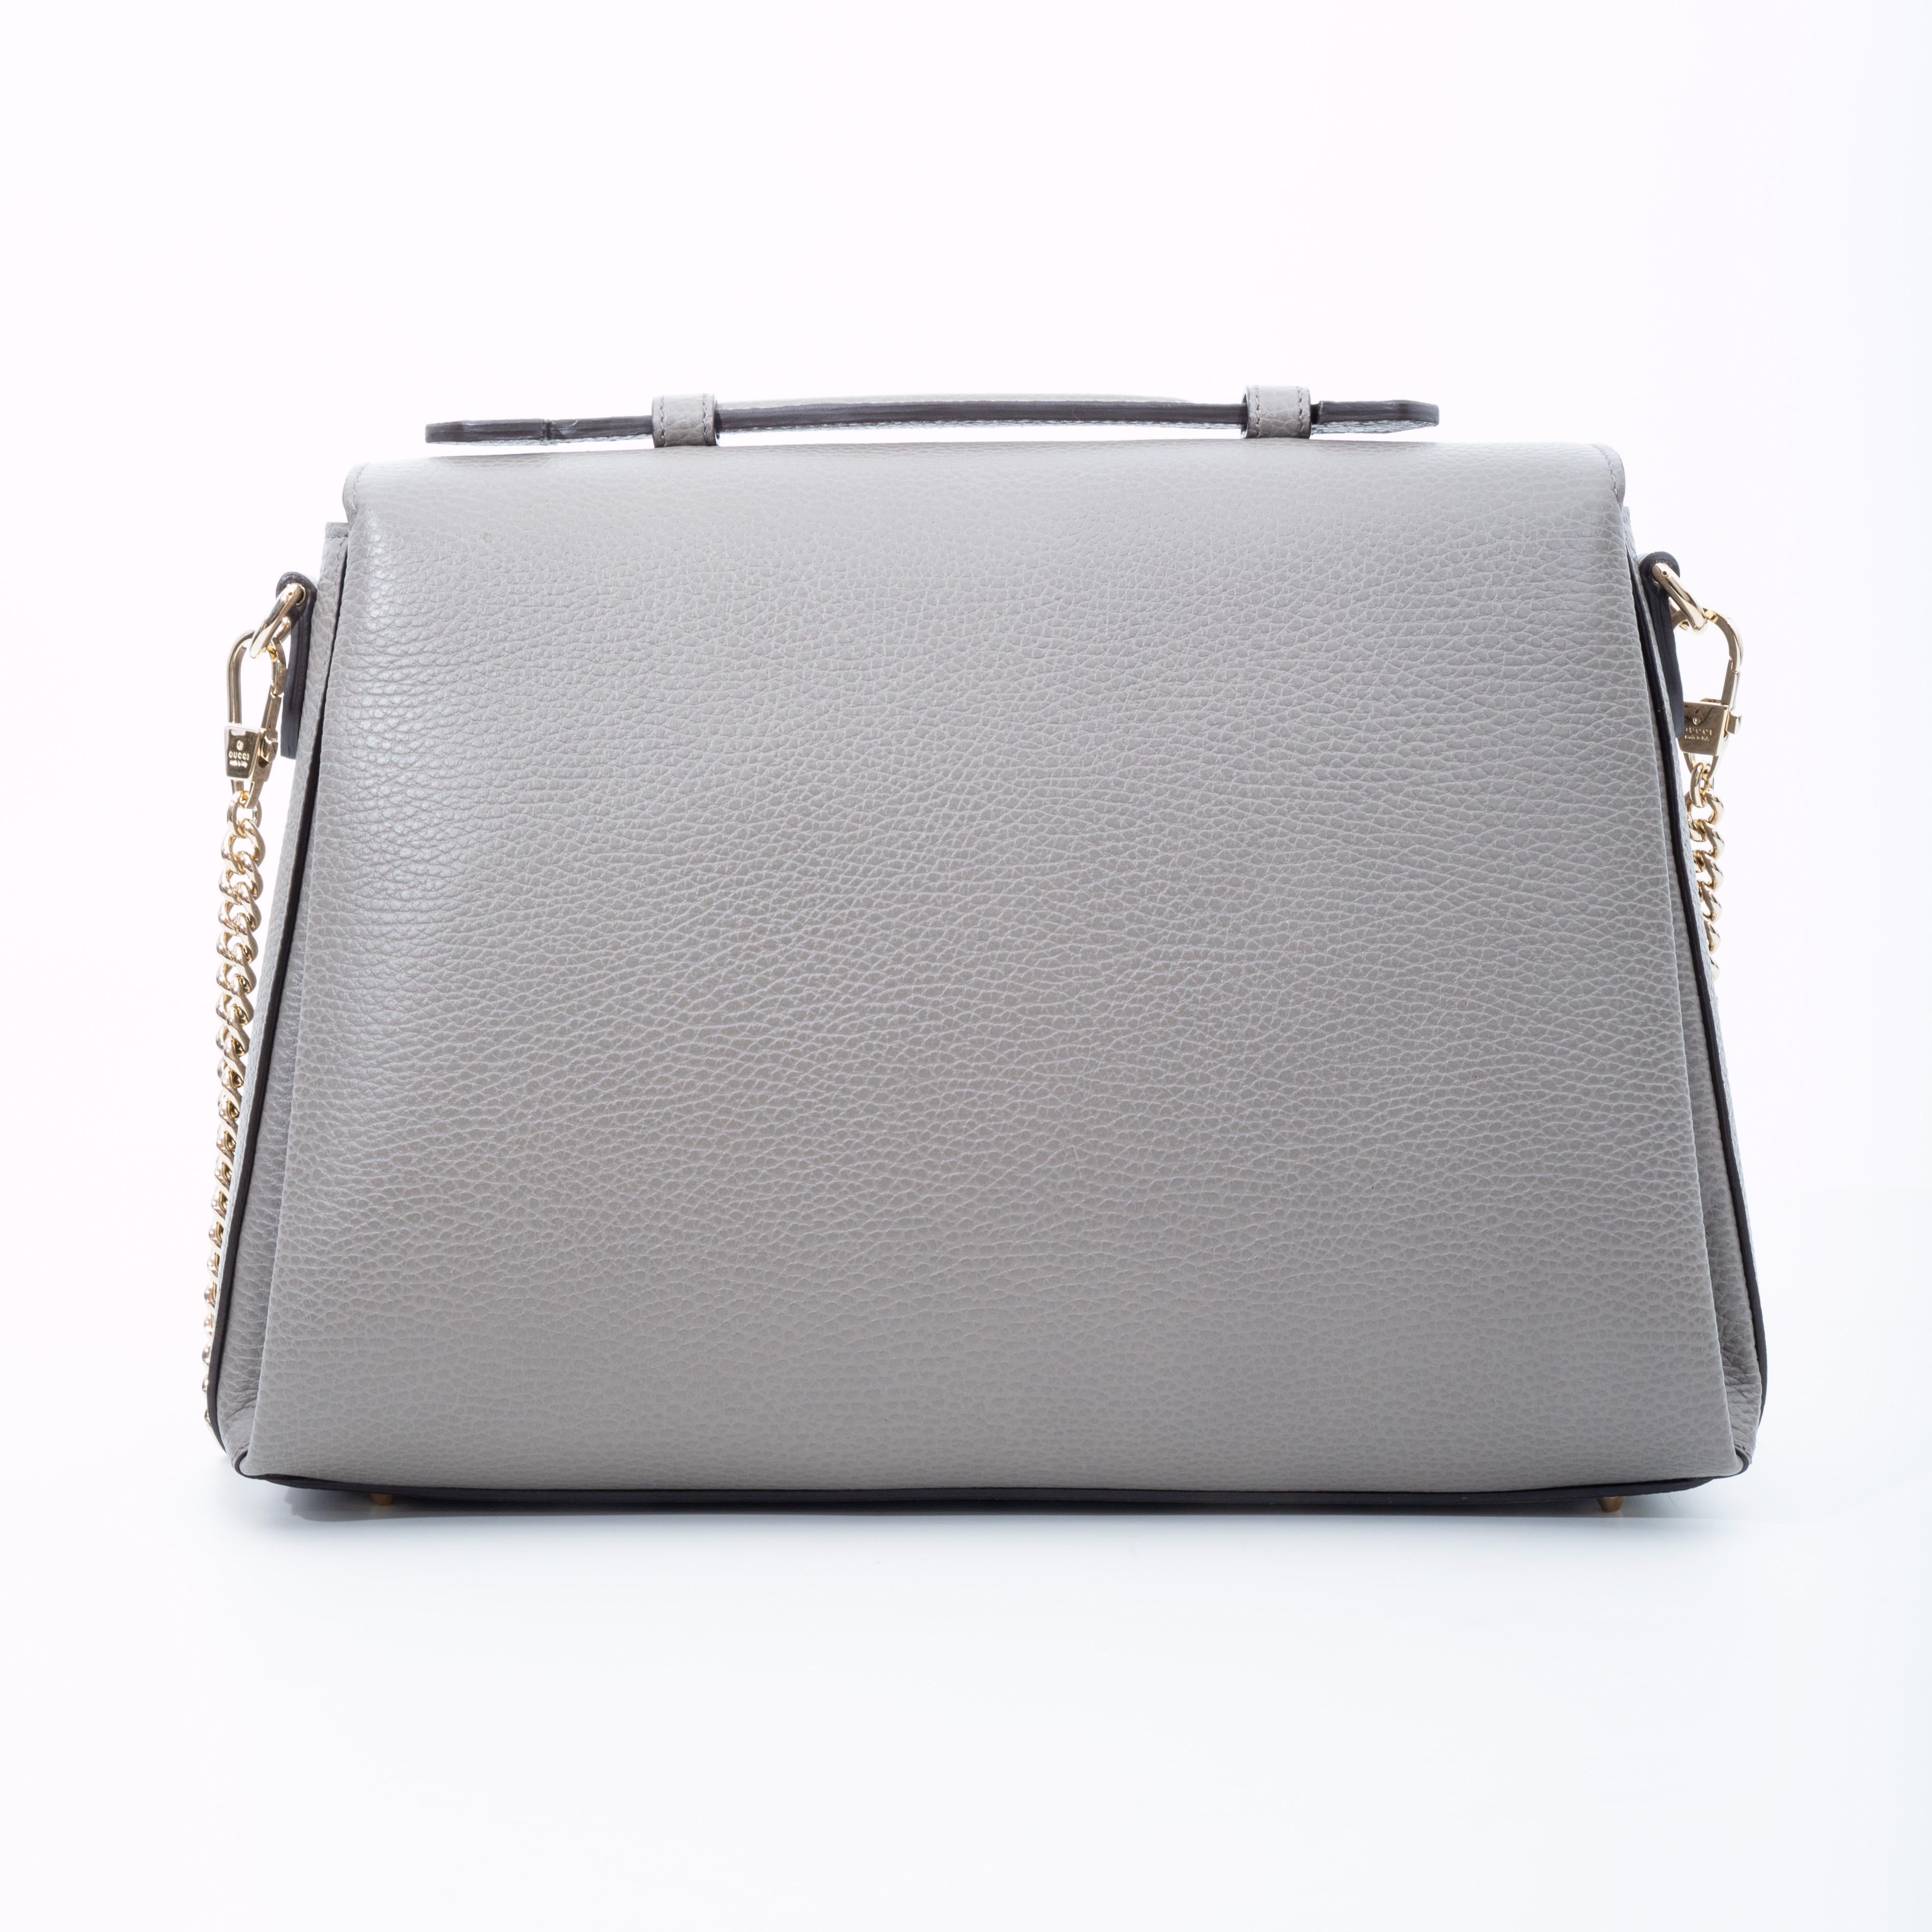 This shoulder bag is made of grained calfskin leather in grey. The bag features a waist length flat leather handle & silver chain link shoulder strap, a front flap with a polished gold interlocking GG emblem, protective feet at base and a